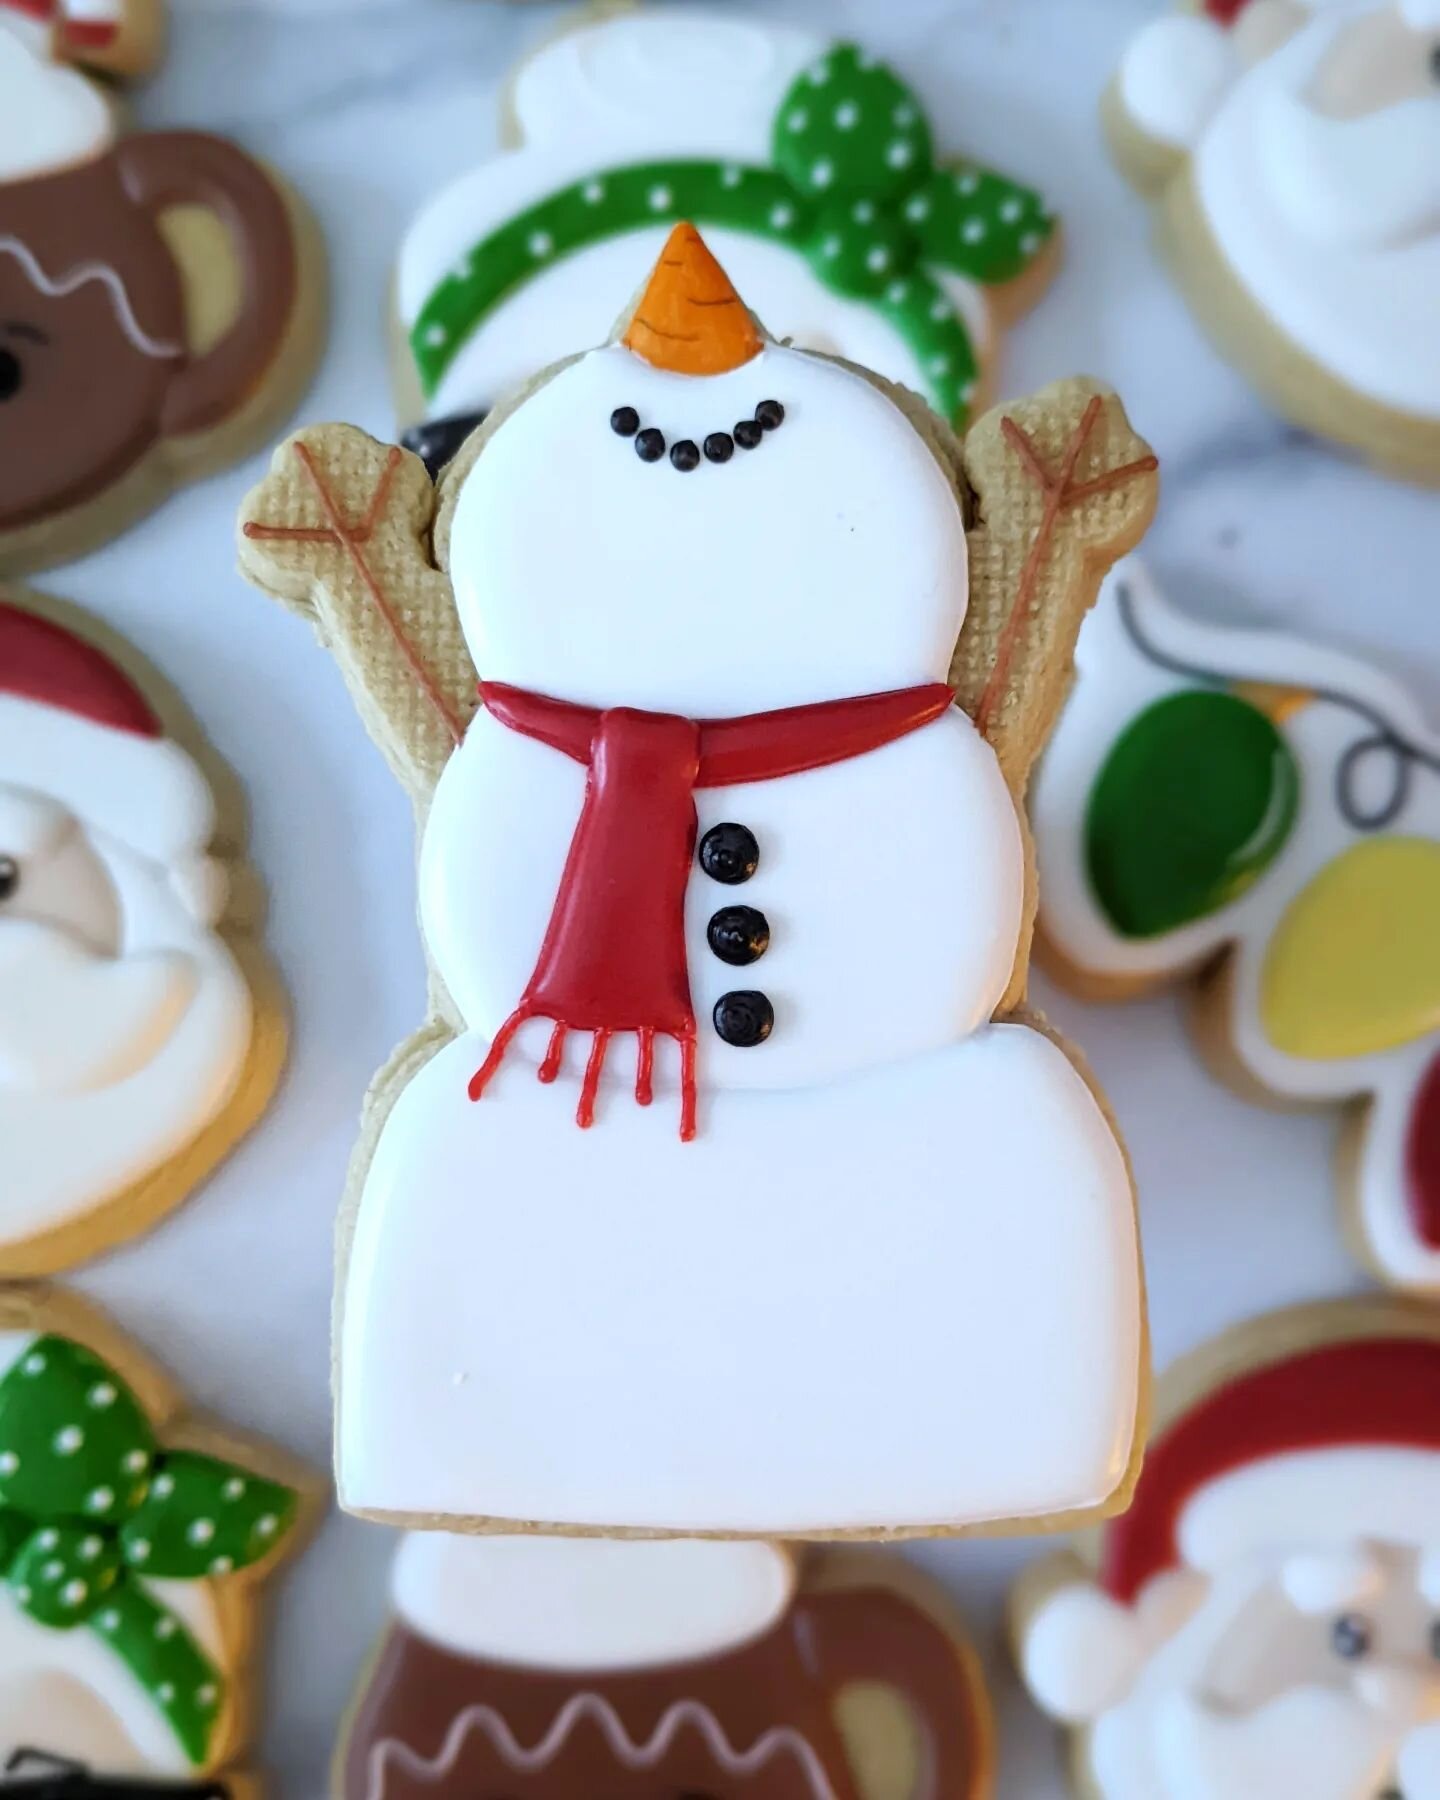 &quot;Santa is coming!!&quot; Screamed the excited Snowman ☃️☃️☃️
.
#Christmas #SantaIscoming #Santa #Snowman #excited #Happy #HappySnowman #SugarArt #EdibleArt #CookieArt #Cookies #CustomCookies #Nyc #cookier #CookieSets #Cookies